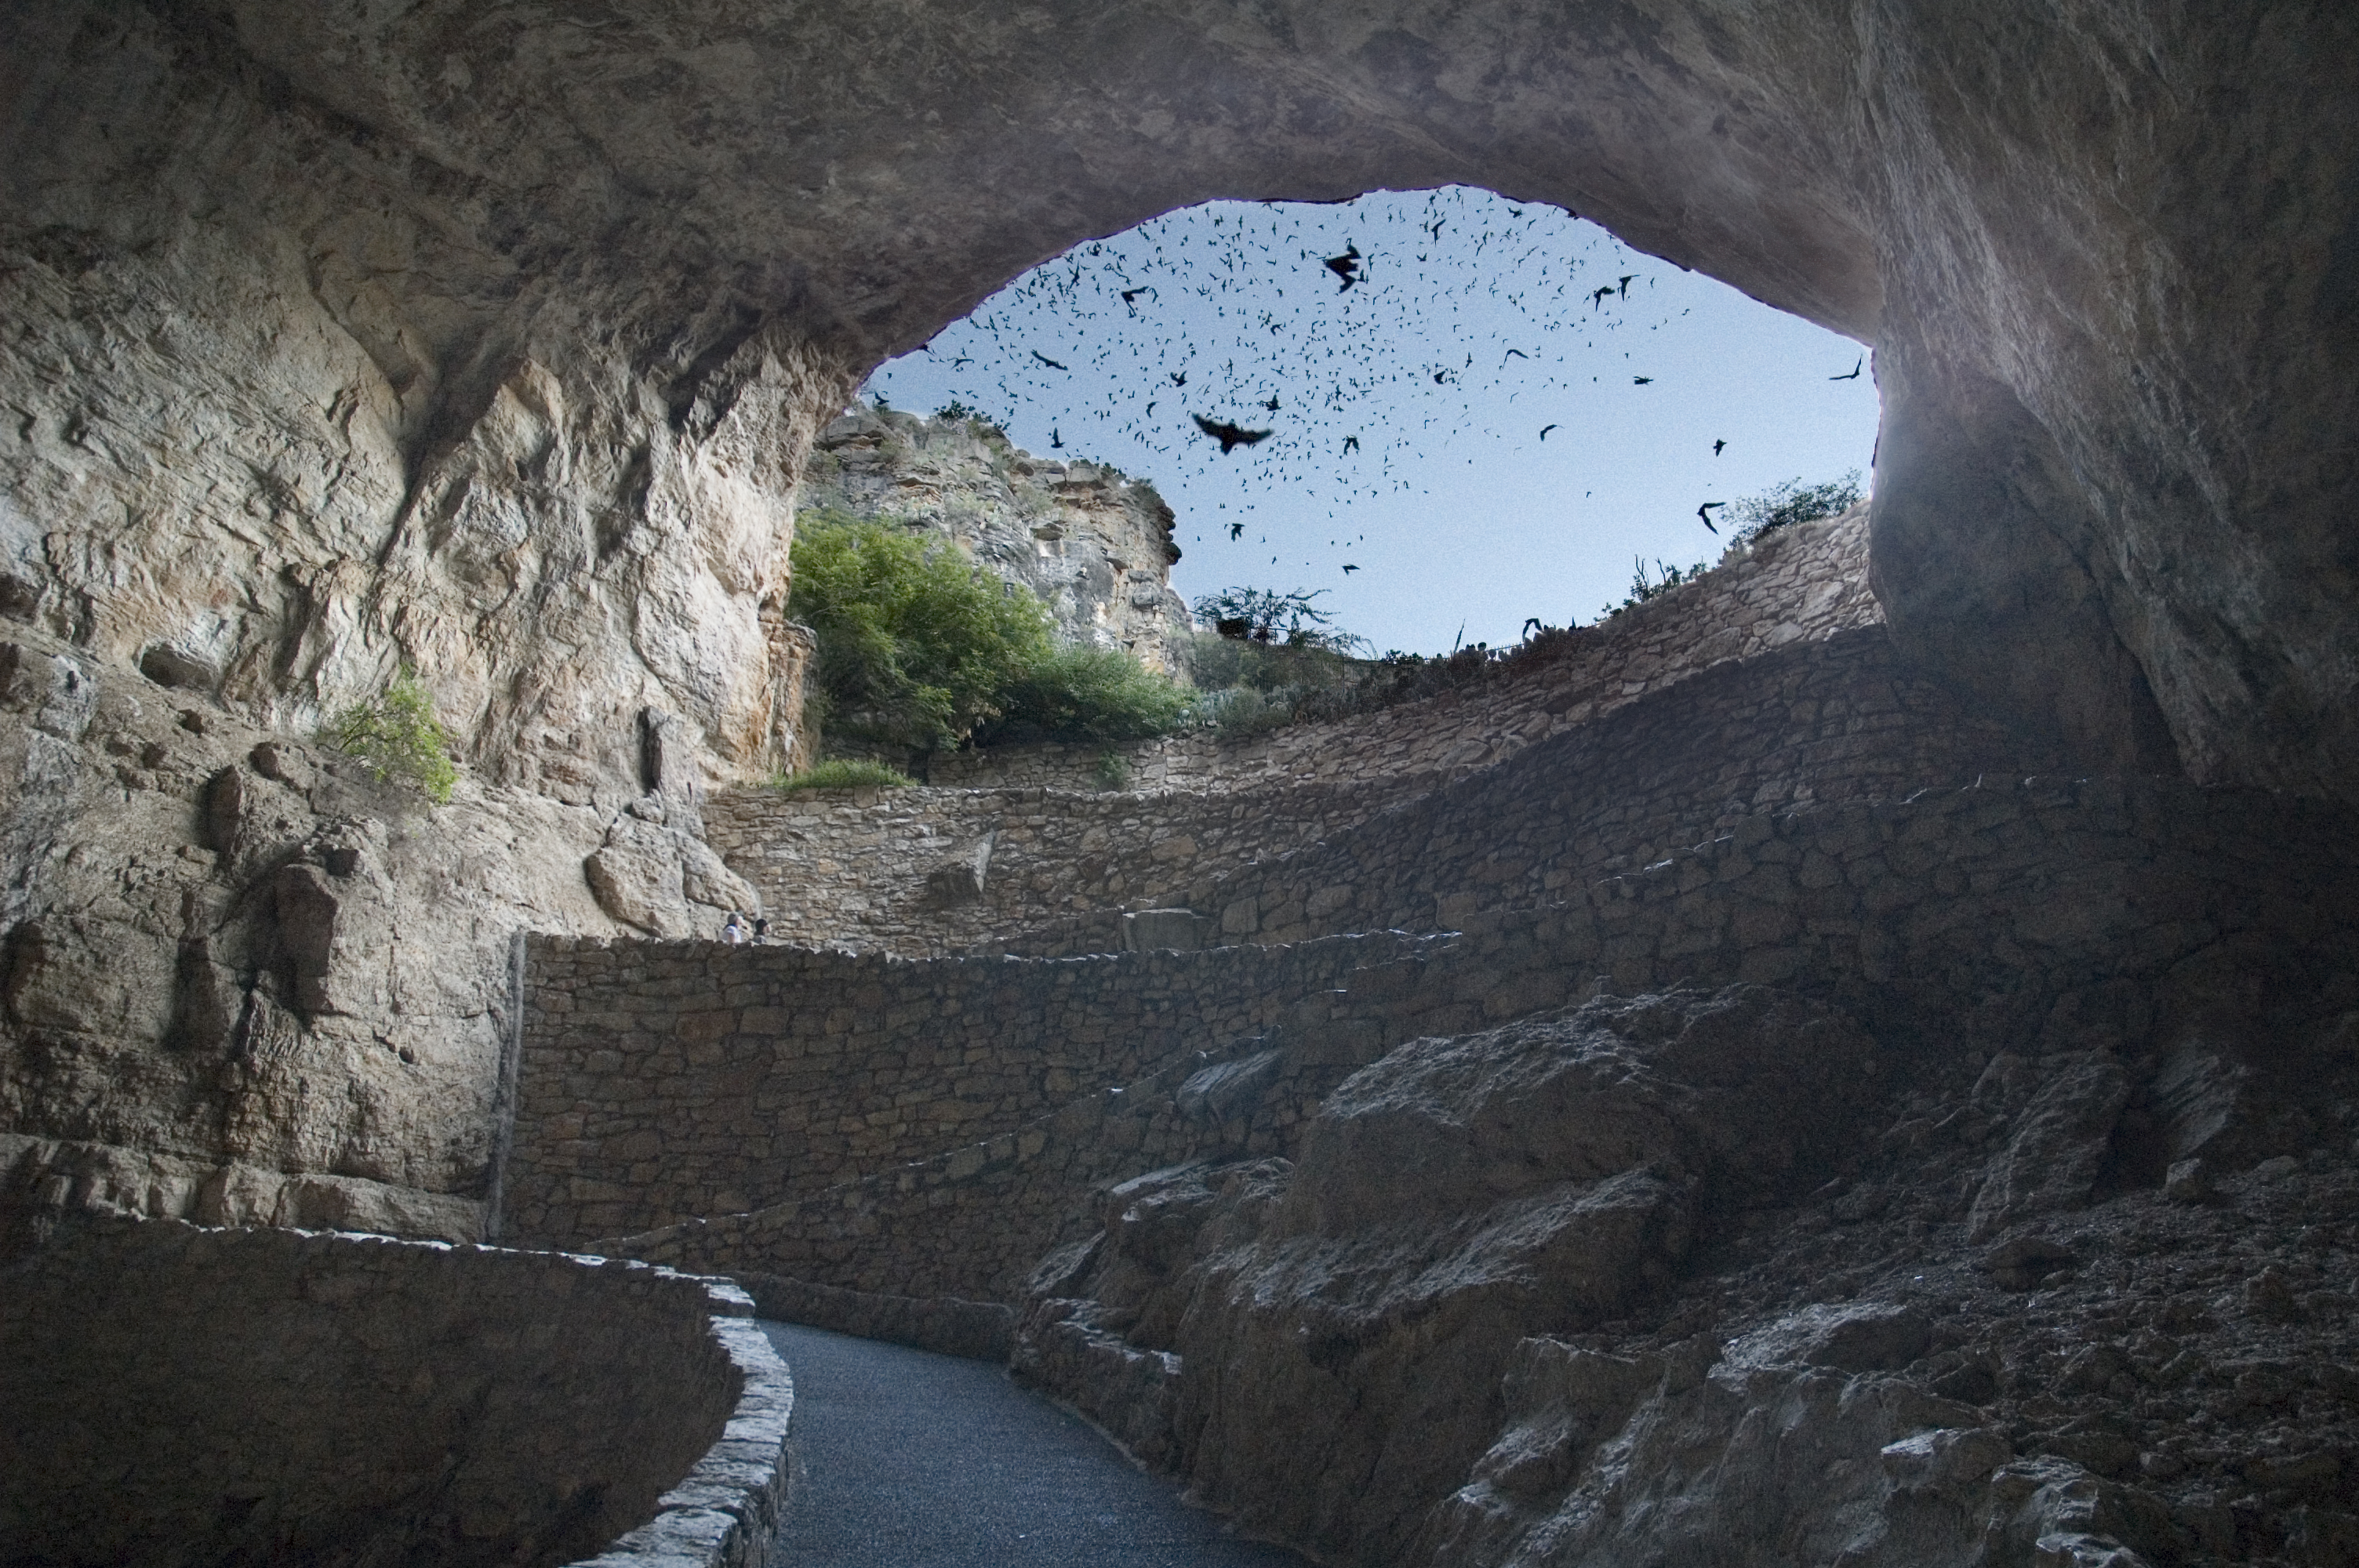 Bats in Caves (U.S. National Park Service)